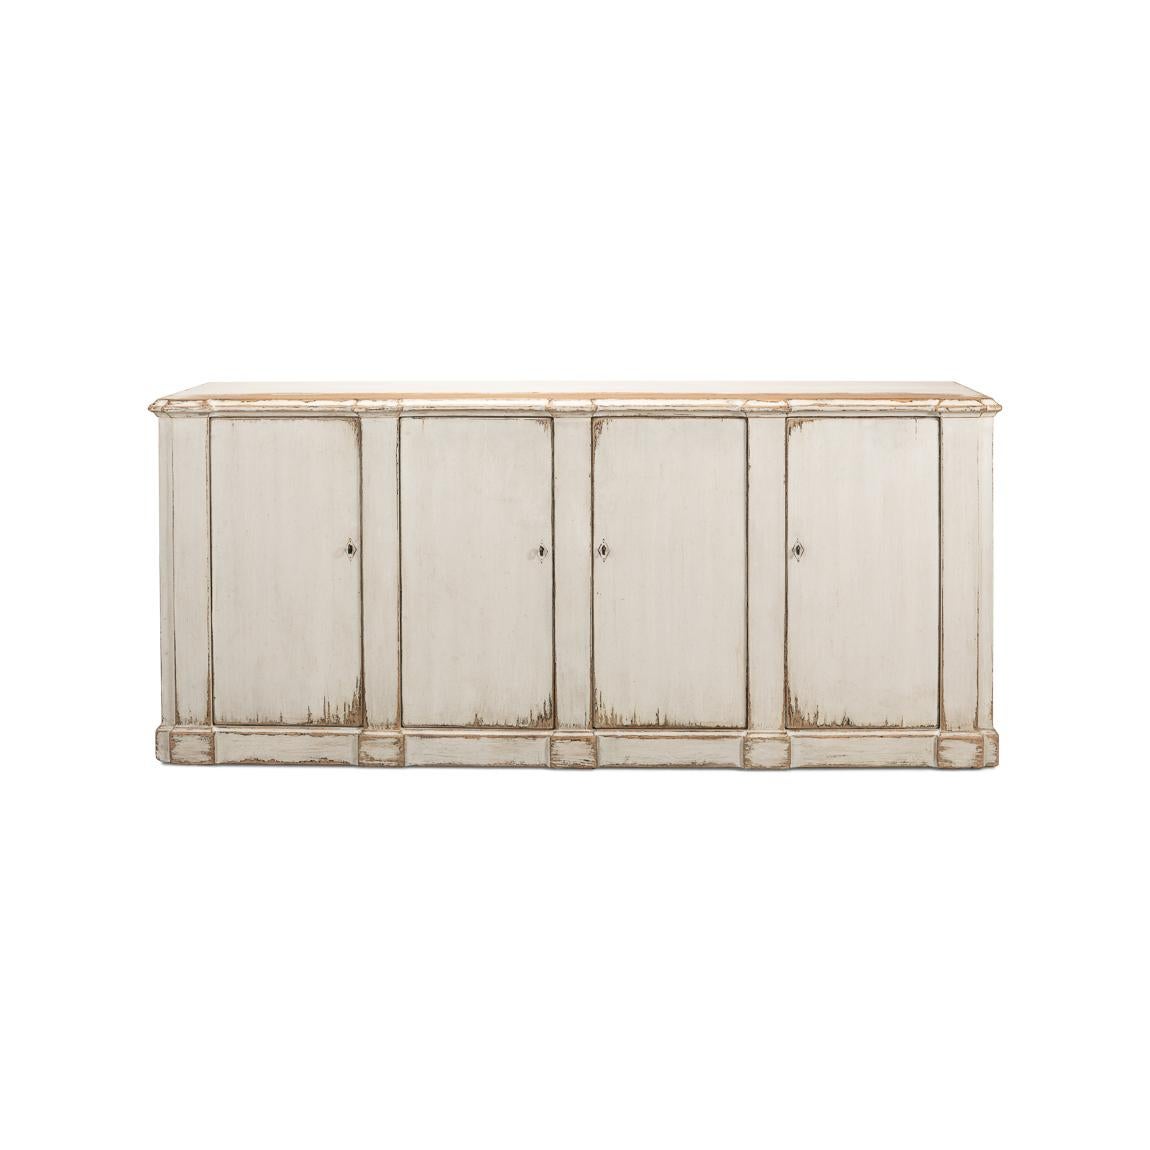 This piece captures the romantic essence of country style with its distressed white finish and vintage charm. The sideboard's generous length, accented by four doors that open to a fitted interior with removable shelves, offers substantial storage